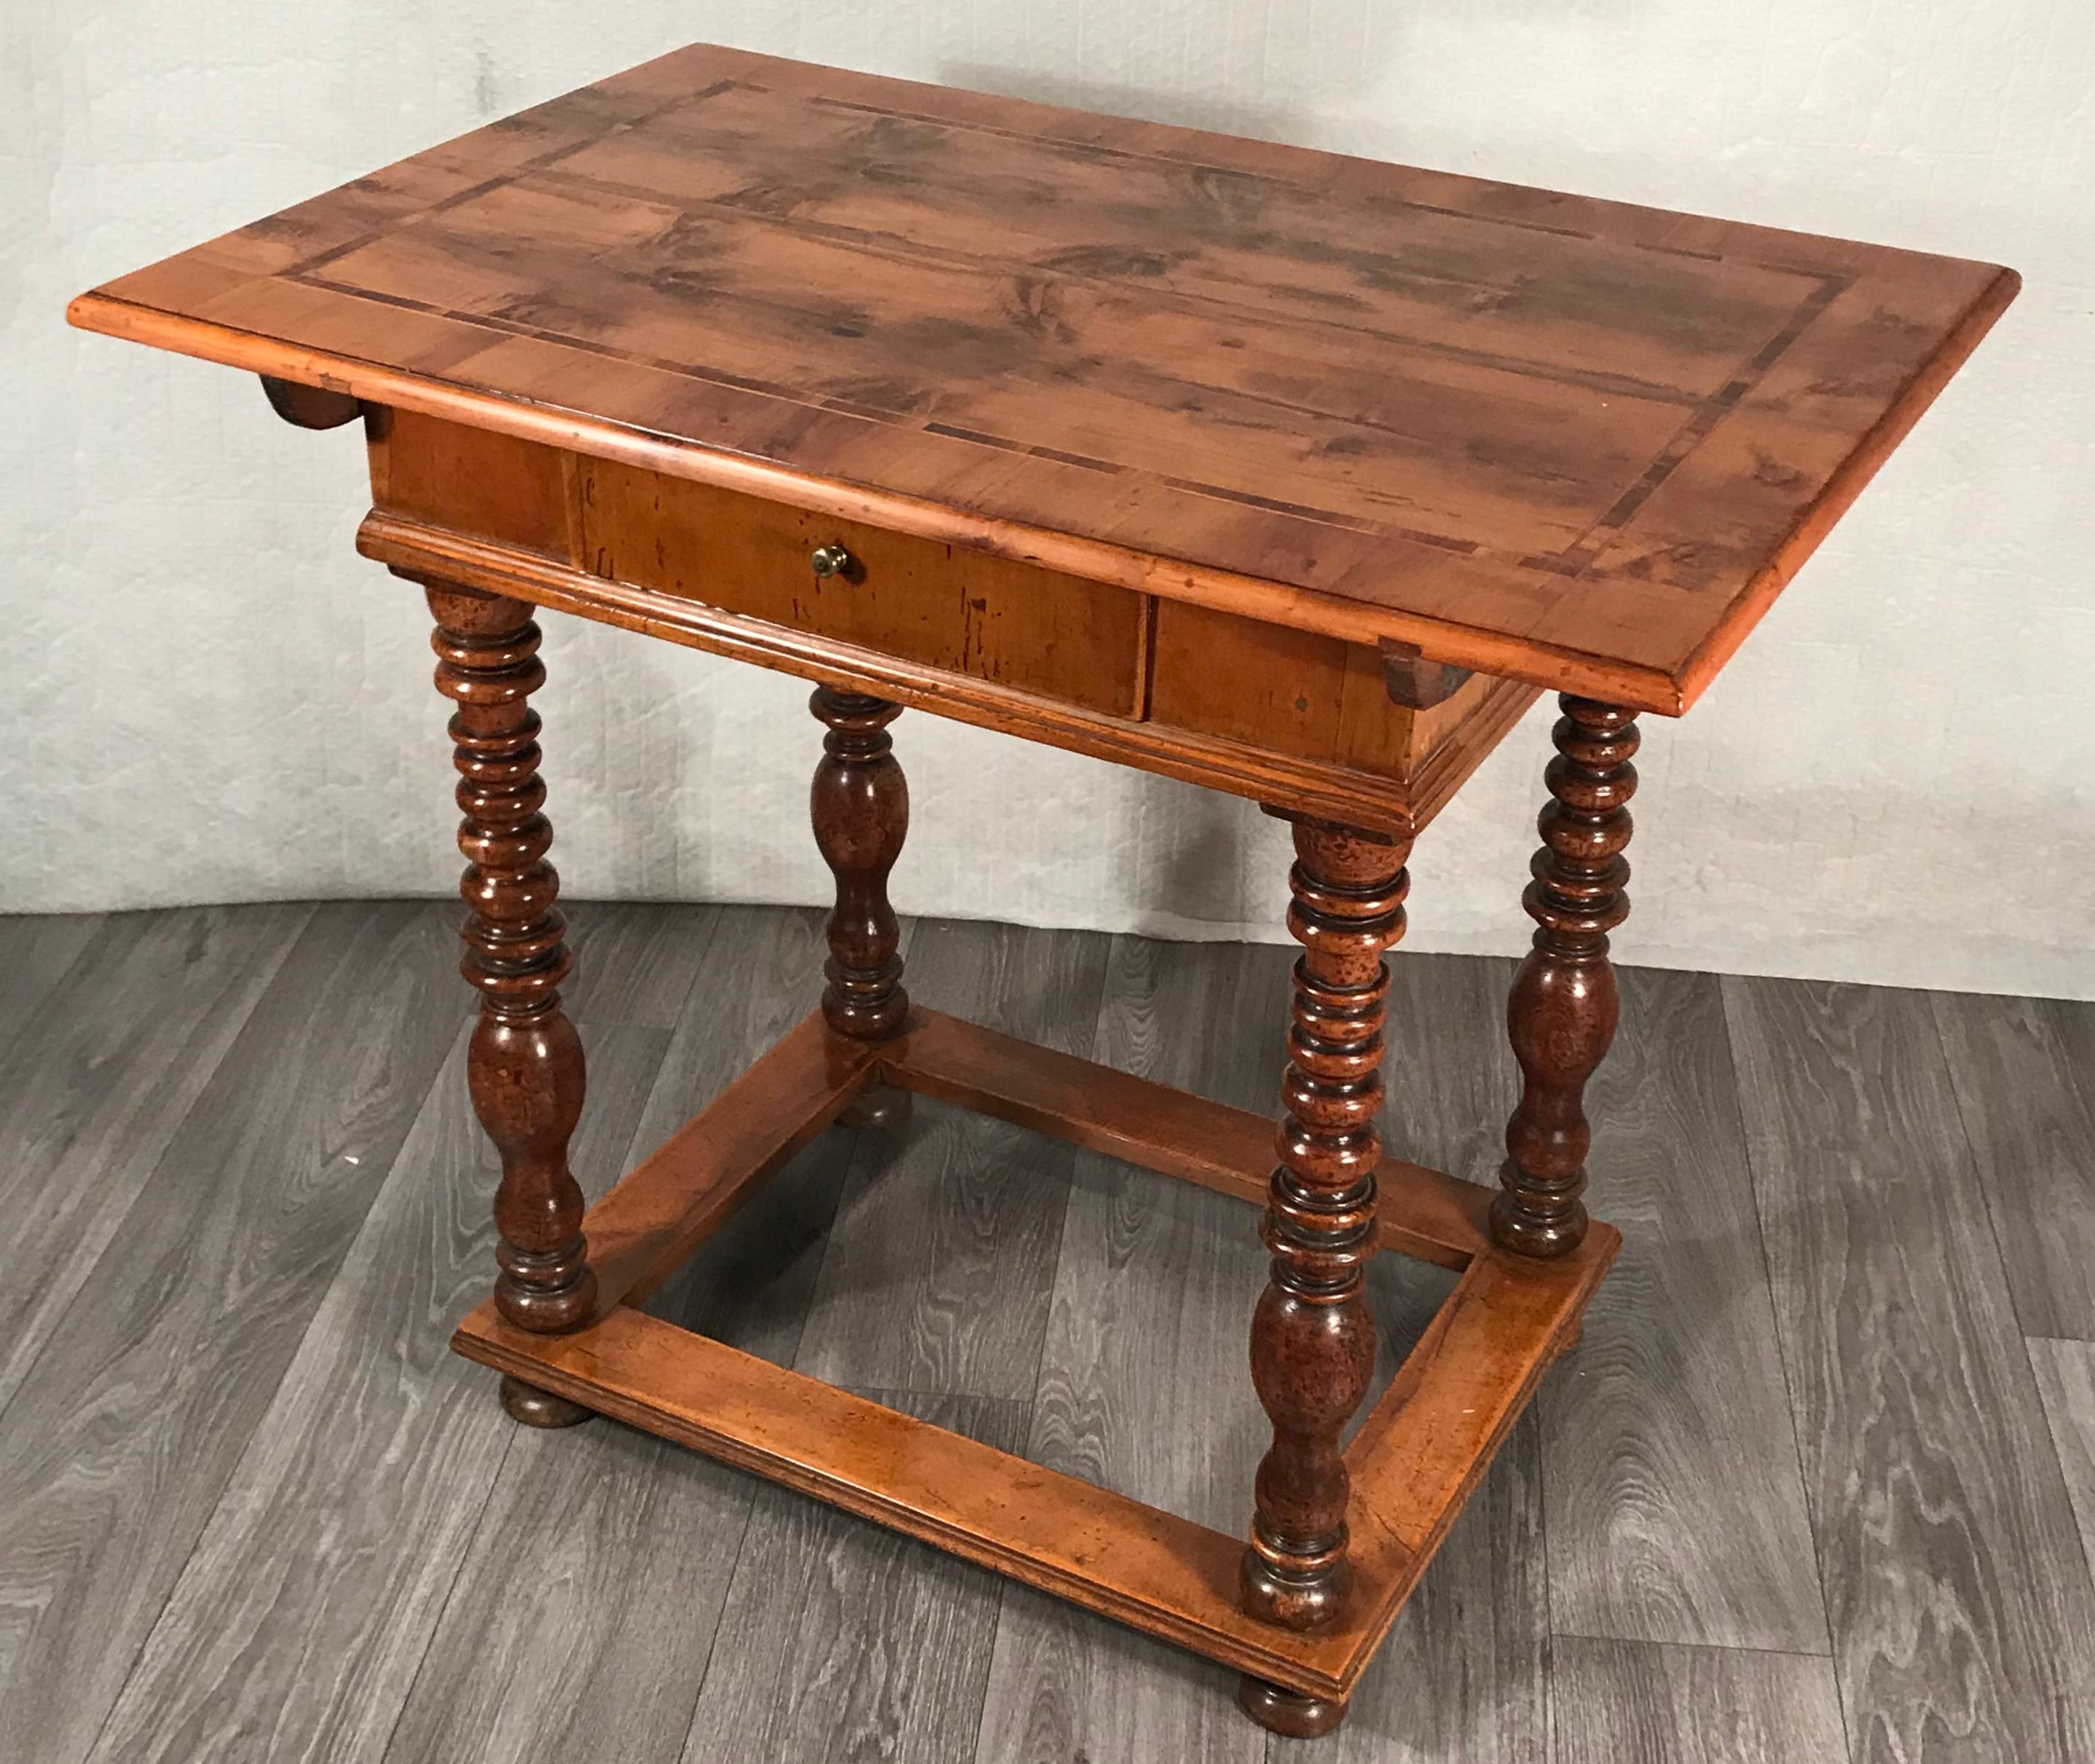 Baroque Table, Southern Germany, Augsburg Region 1750, Walnut For Sale 1